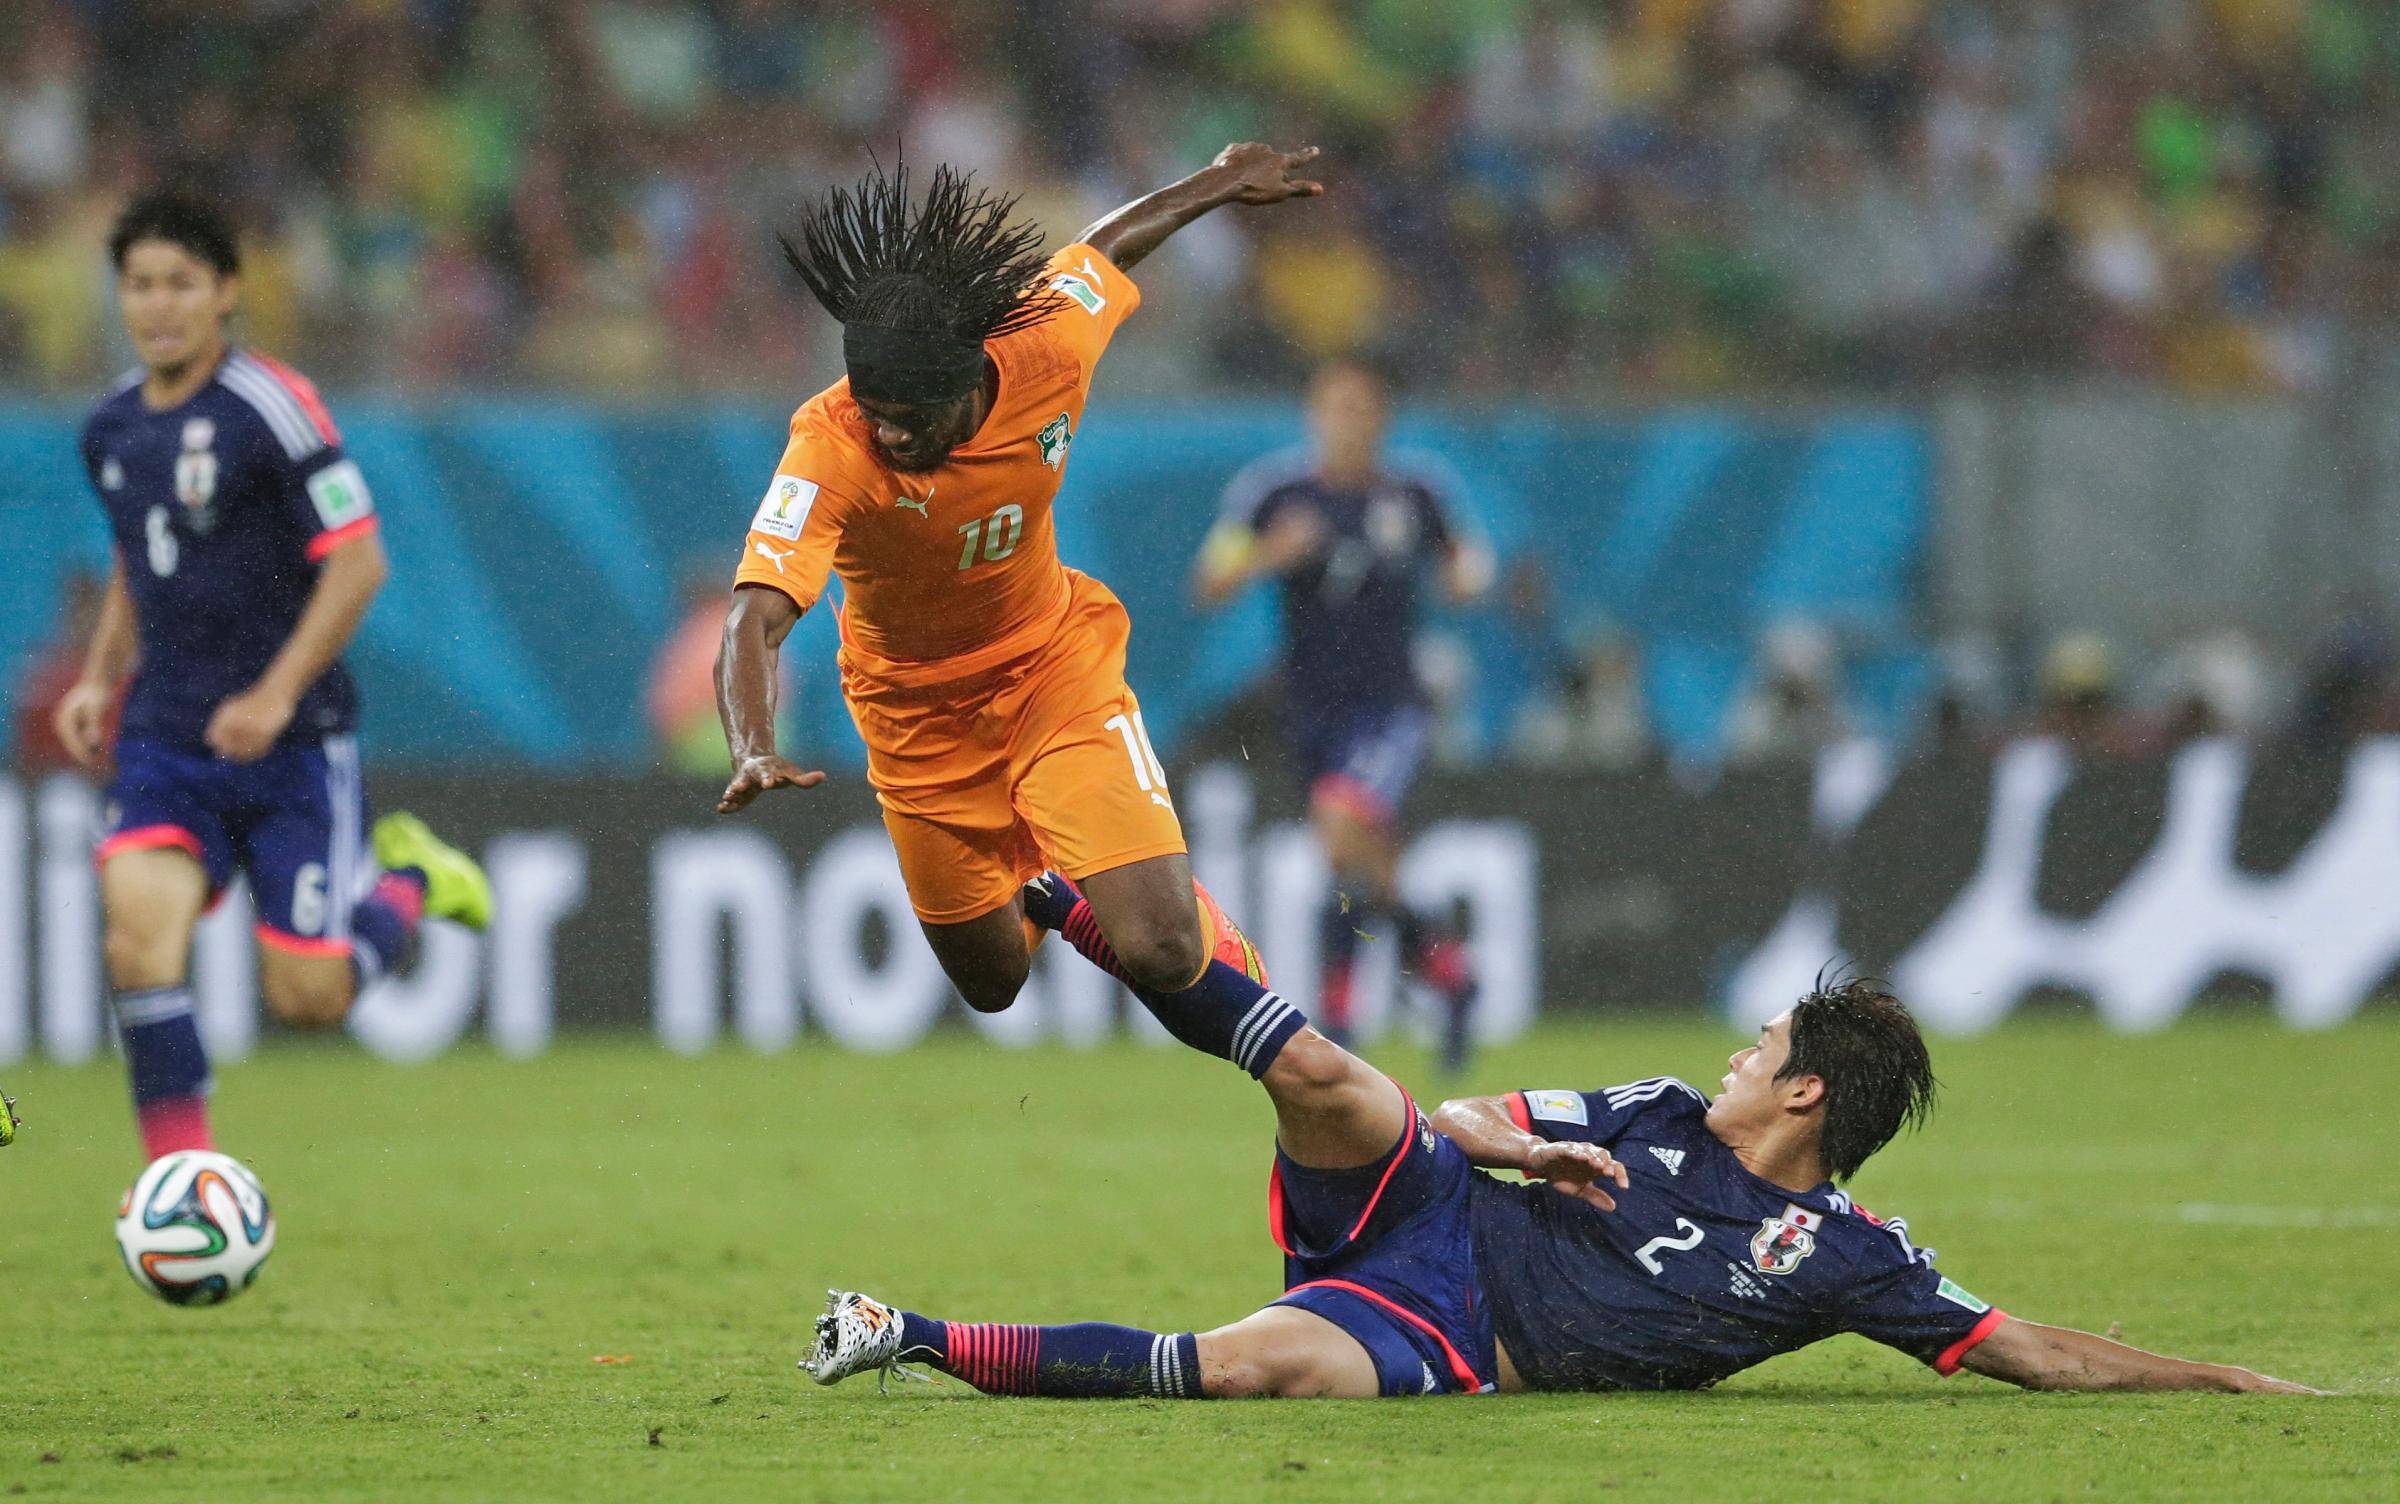 Ivory Coast's Gervinho is tripped by Japan's Atsuto Uchida during the match at the Arena Pernambuco in Recife, Brazil on June 14, 2014.